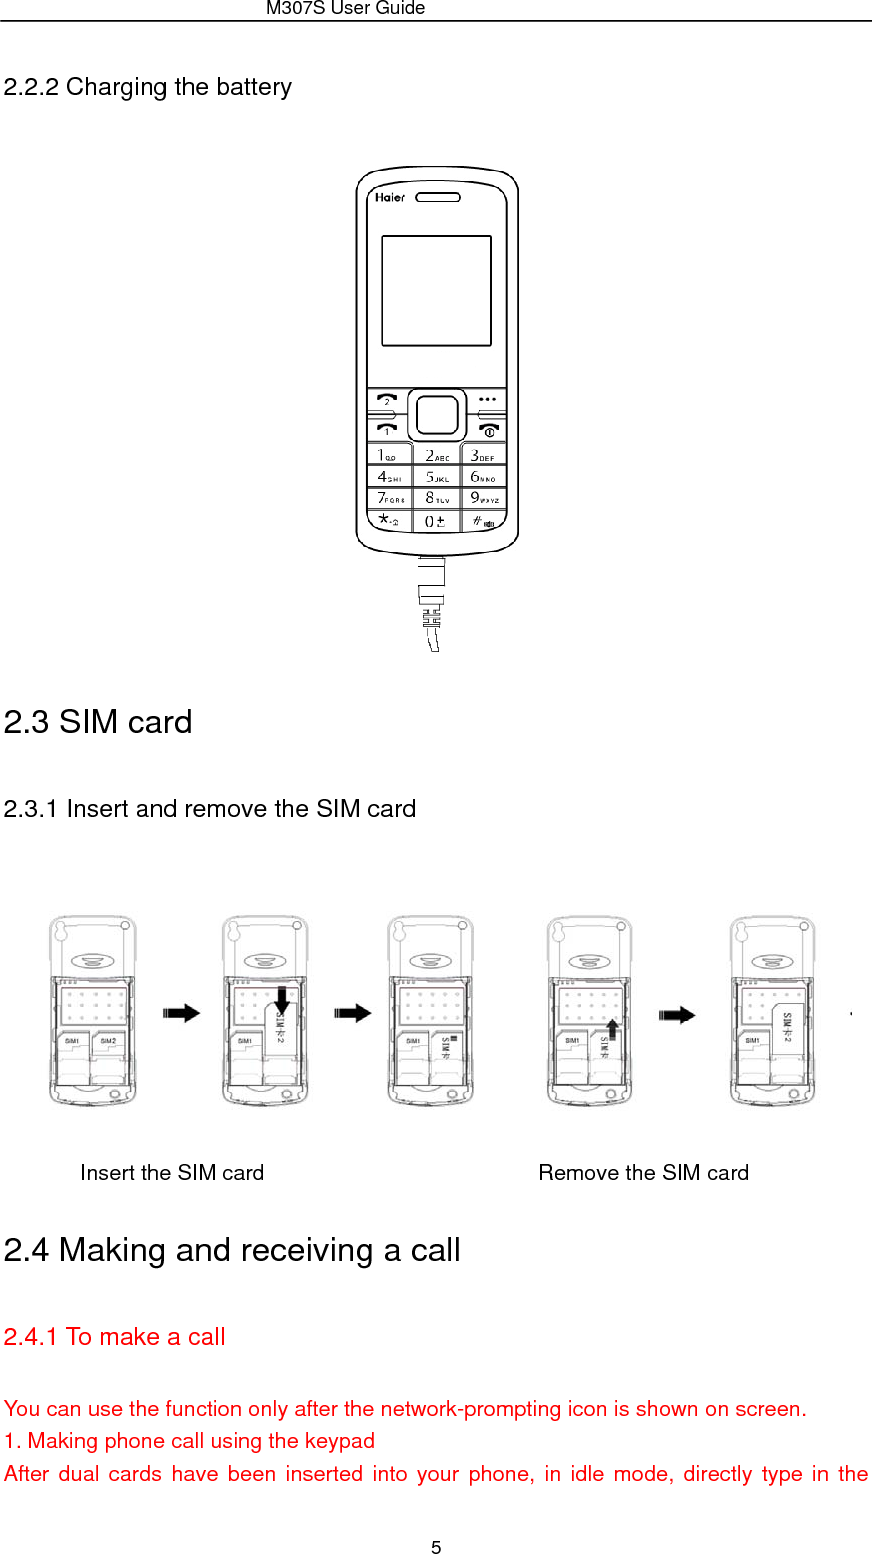                 M307S User Guide 5 2.2.2 Charging the battery  2.3 SIM card   2.3.1 Insert and remove the SIM card              Insert the SIM card                         Remove the SIM card 2.4 Making and receiving a call 2.4.1 To make a call You can use the function only after the network-prompting icon is shown on screen. 1. Making phone call using the keypad After dual cards have been inserted into your phone, in idle mode, directly type in the 